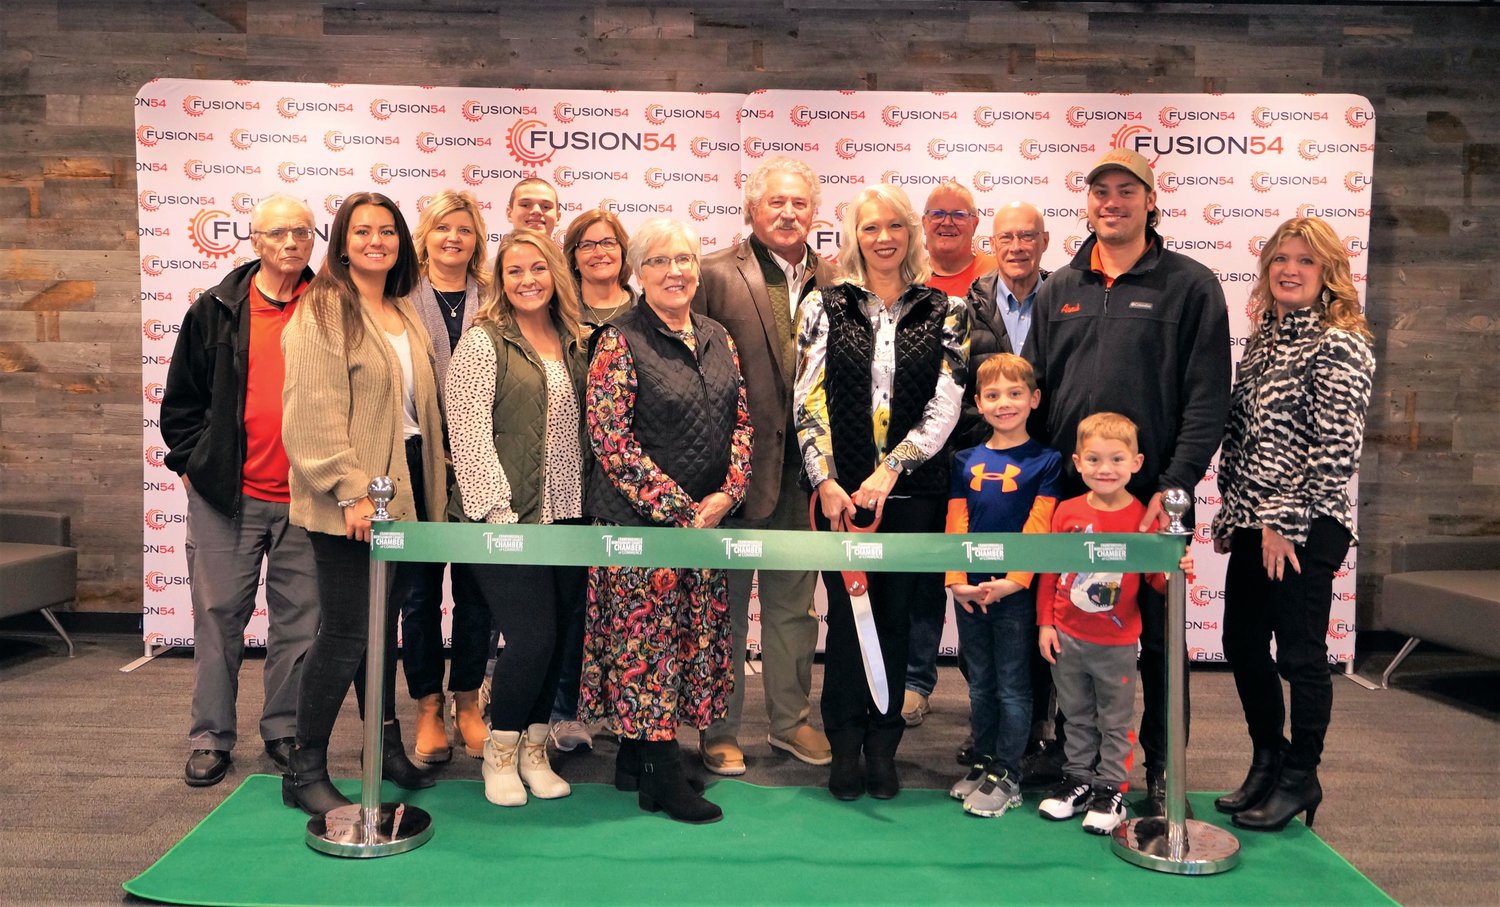 The Crawfordsville-Montgomery County Chamber of Commerce recently welcomed the opening of True Path Human Potential Coaching with a ribbon cutting ceremony at Fusion 54. The remote business was founded by Debbie Schavietello and aims to maximize the potential of all people willing to put in the effort to reach their life goals.